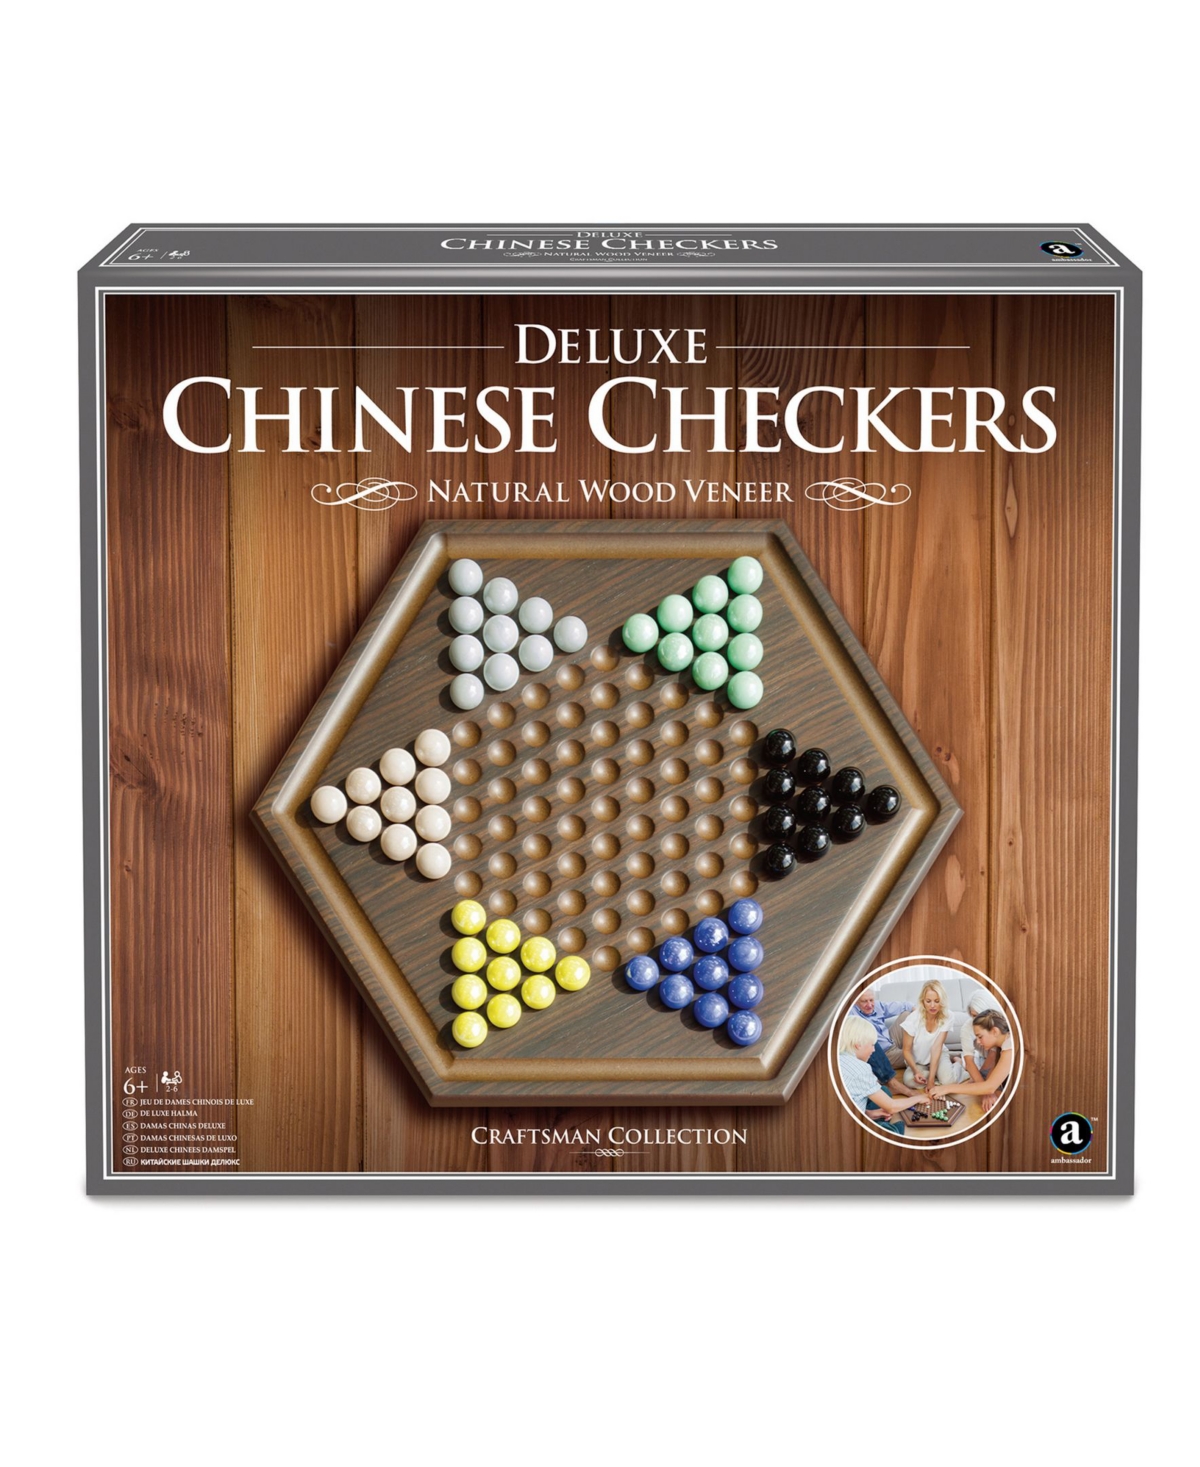 Masterpieces Puzzles Merchant Ambassador Craftsman Deluxe Chinese Checkers Game Set In Multi